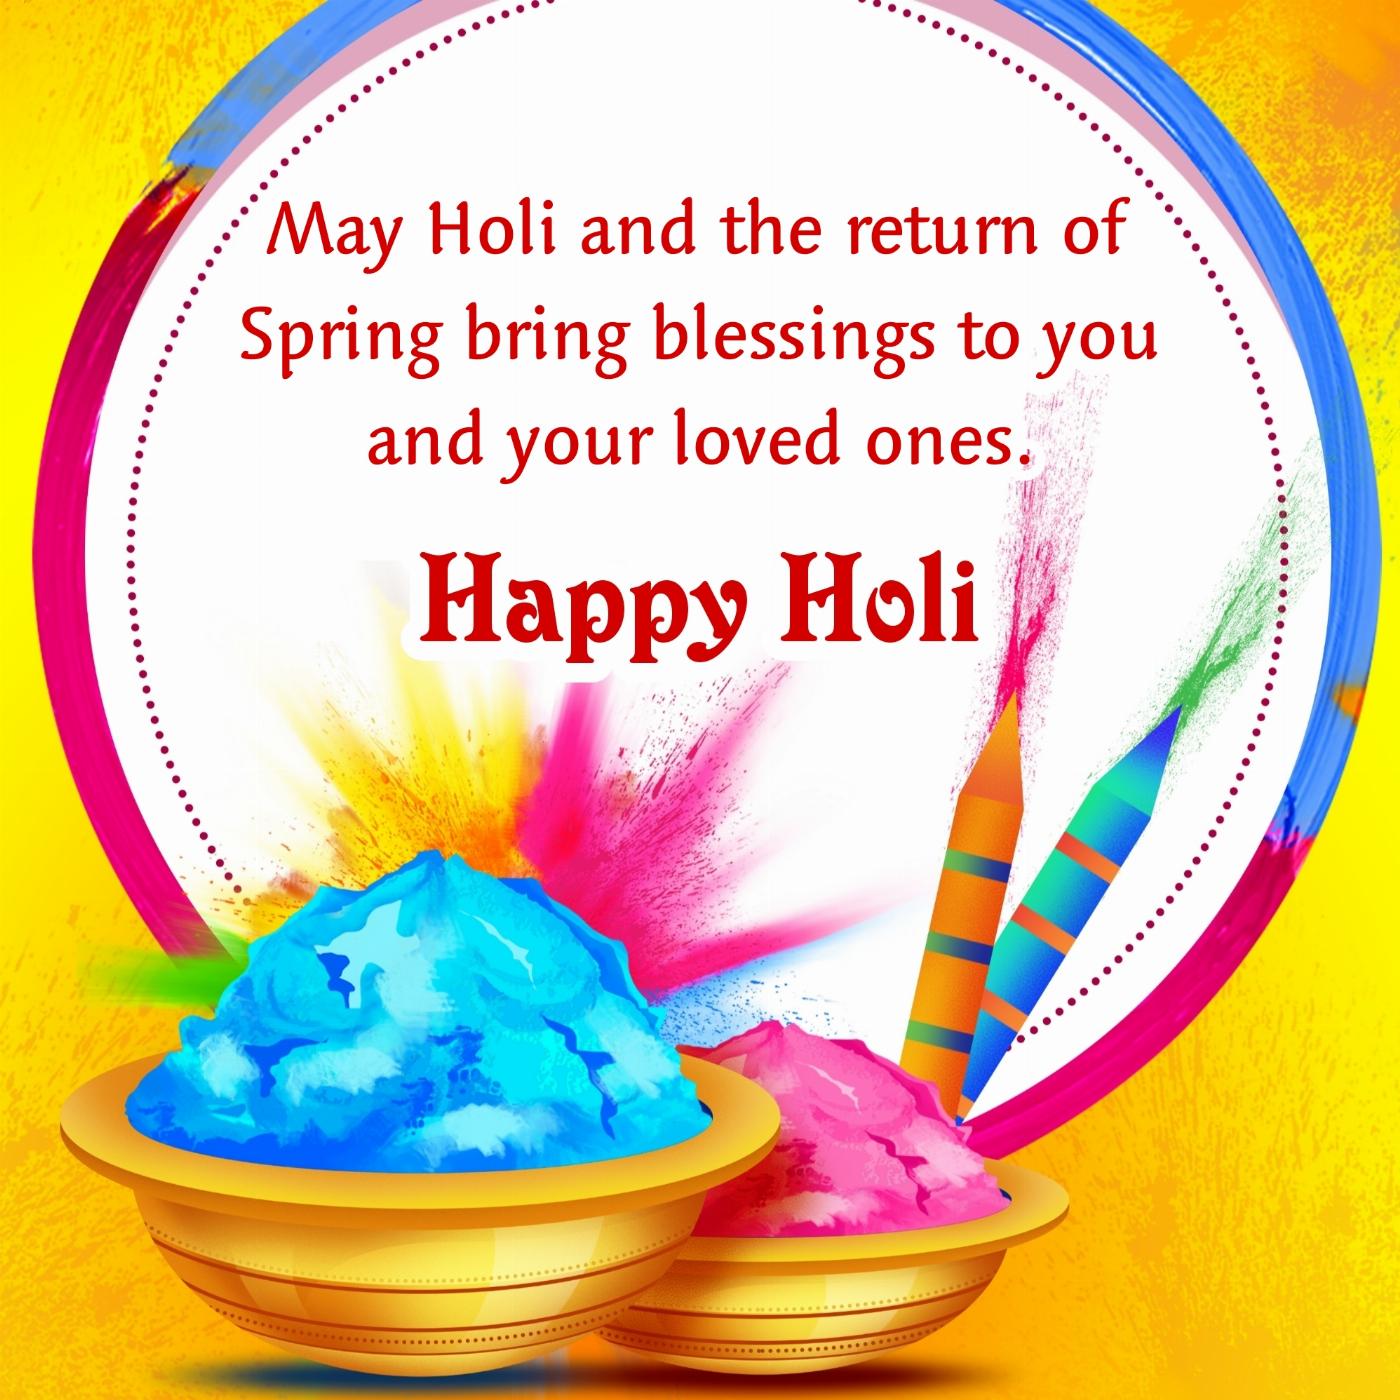 May Holi and the return of Spring bring blessings to you and your loved ones